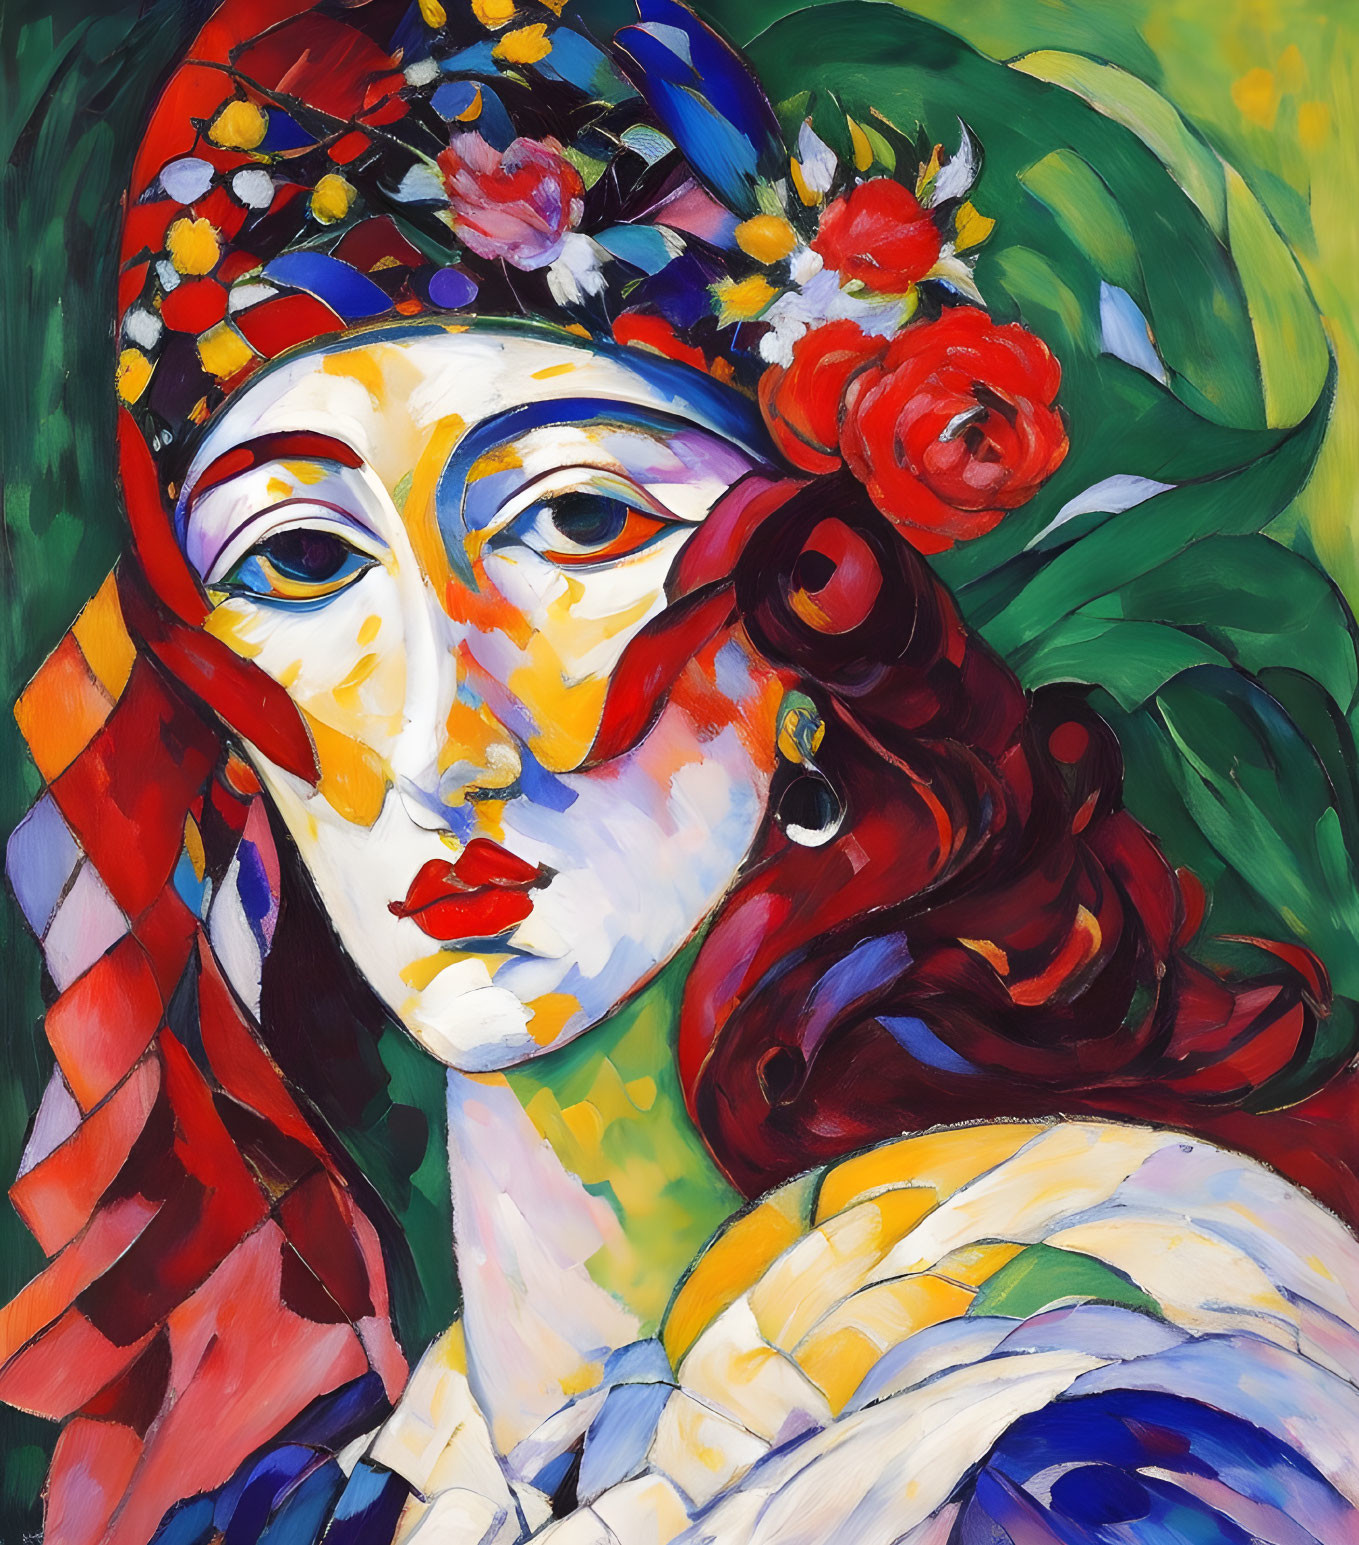 Colorful abstract portrait of a woman with vibrant headdress and face paint